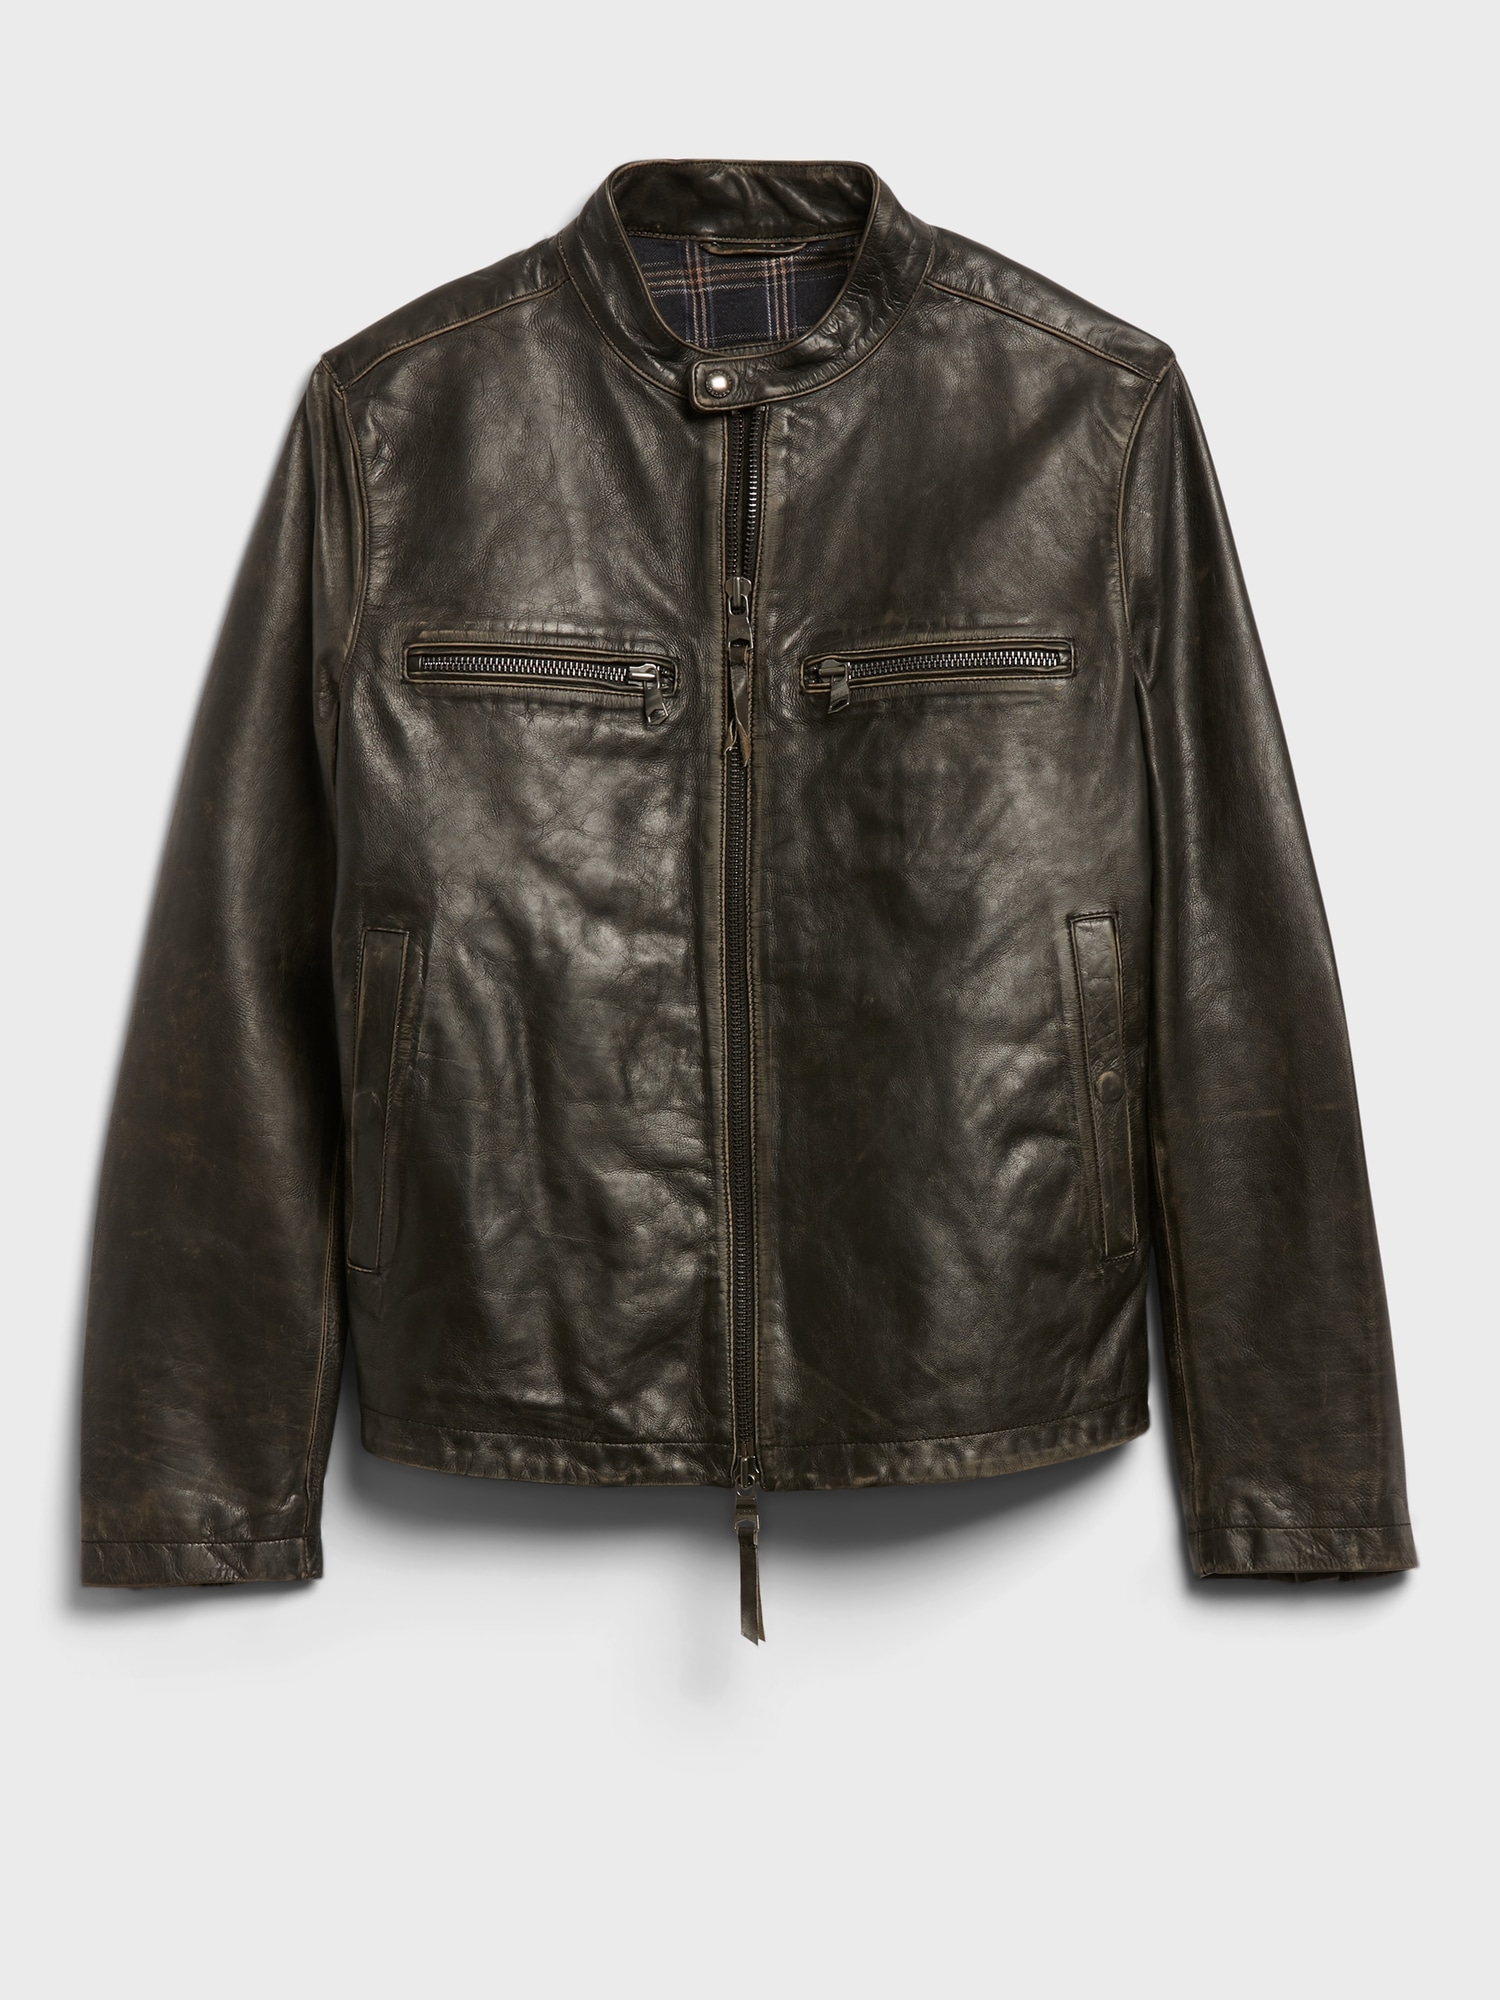 VINTAGE LEATHER JACKET Lucky Brand, 50% OFF